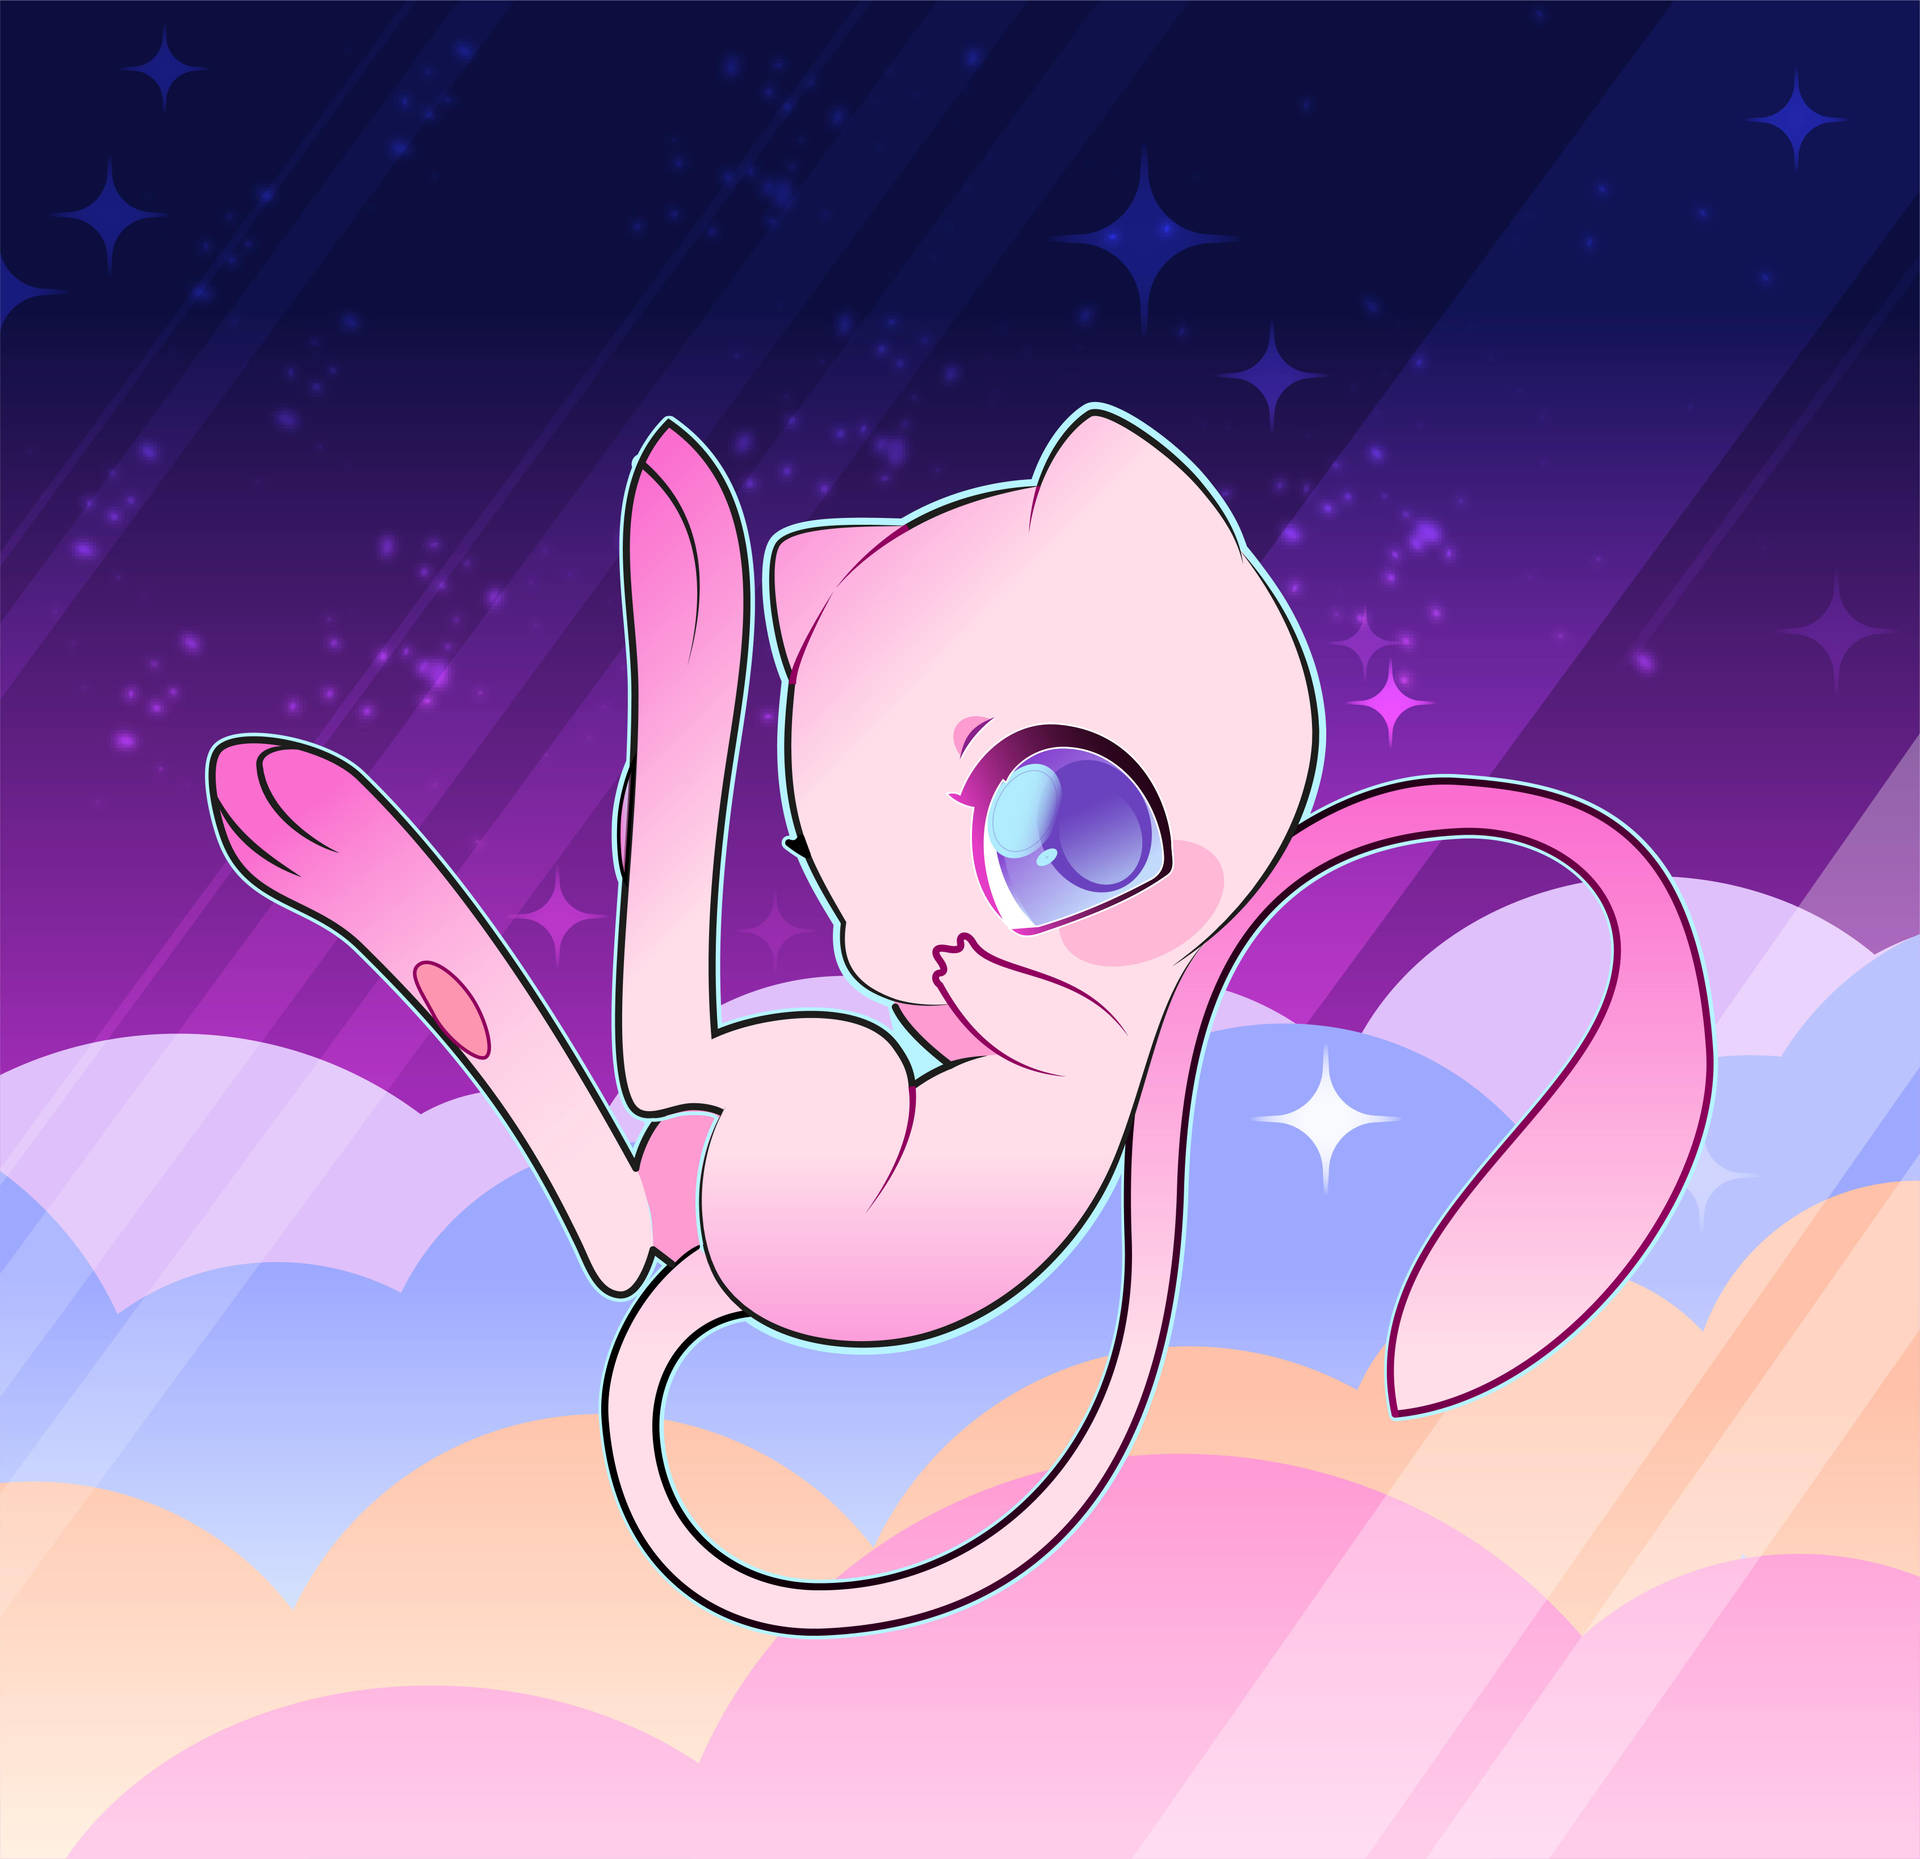 Mew 6764X6548 Wallpaper and Background Image